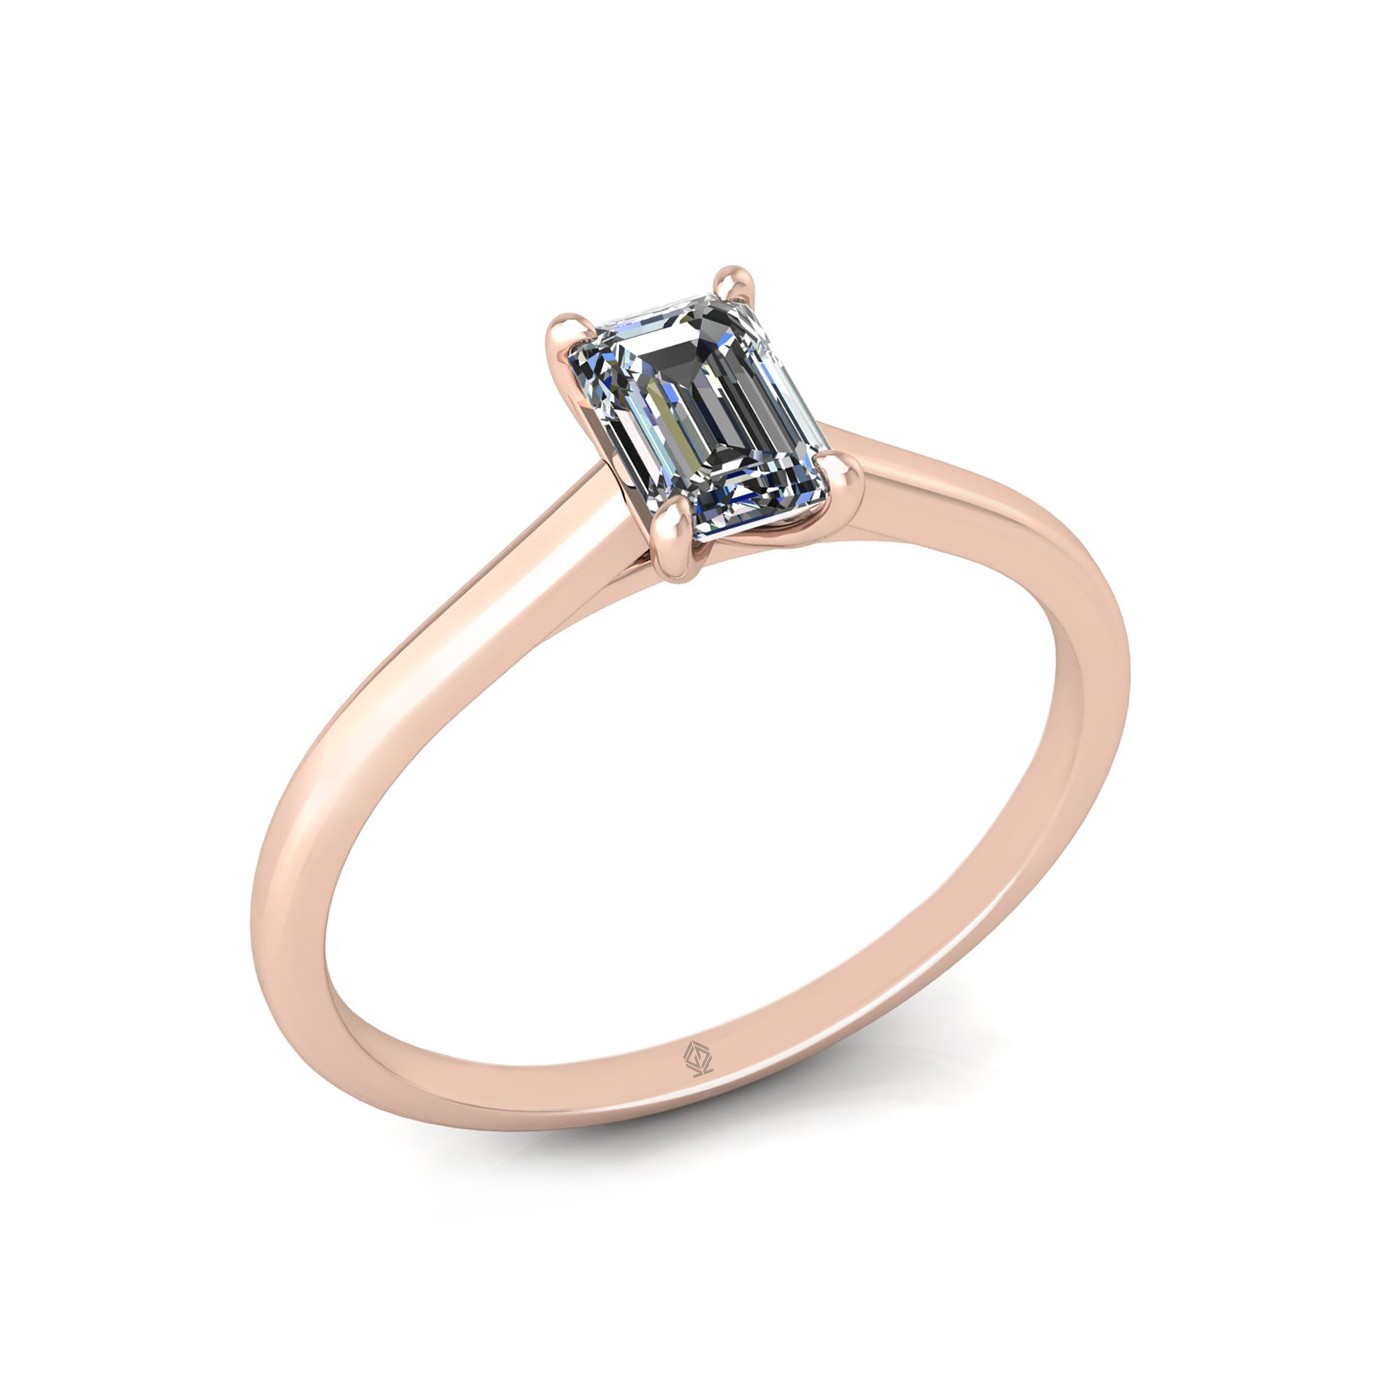 18k rose gold  0,50 ct 4 prongs solitaire emerald cut diamond engagement ring with whisper thin band